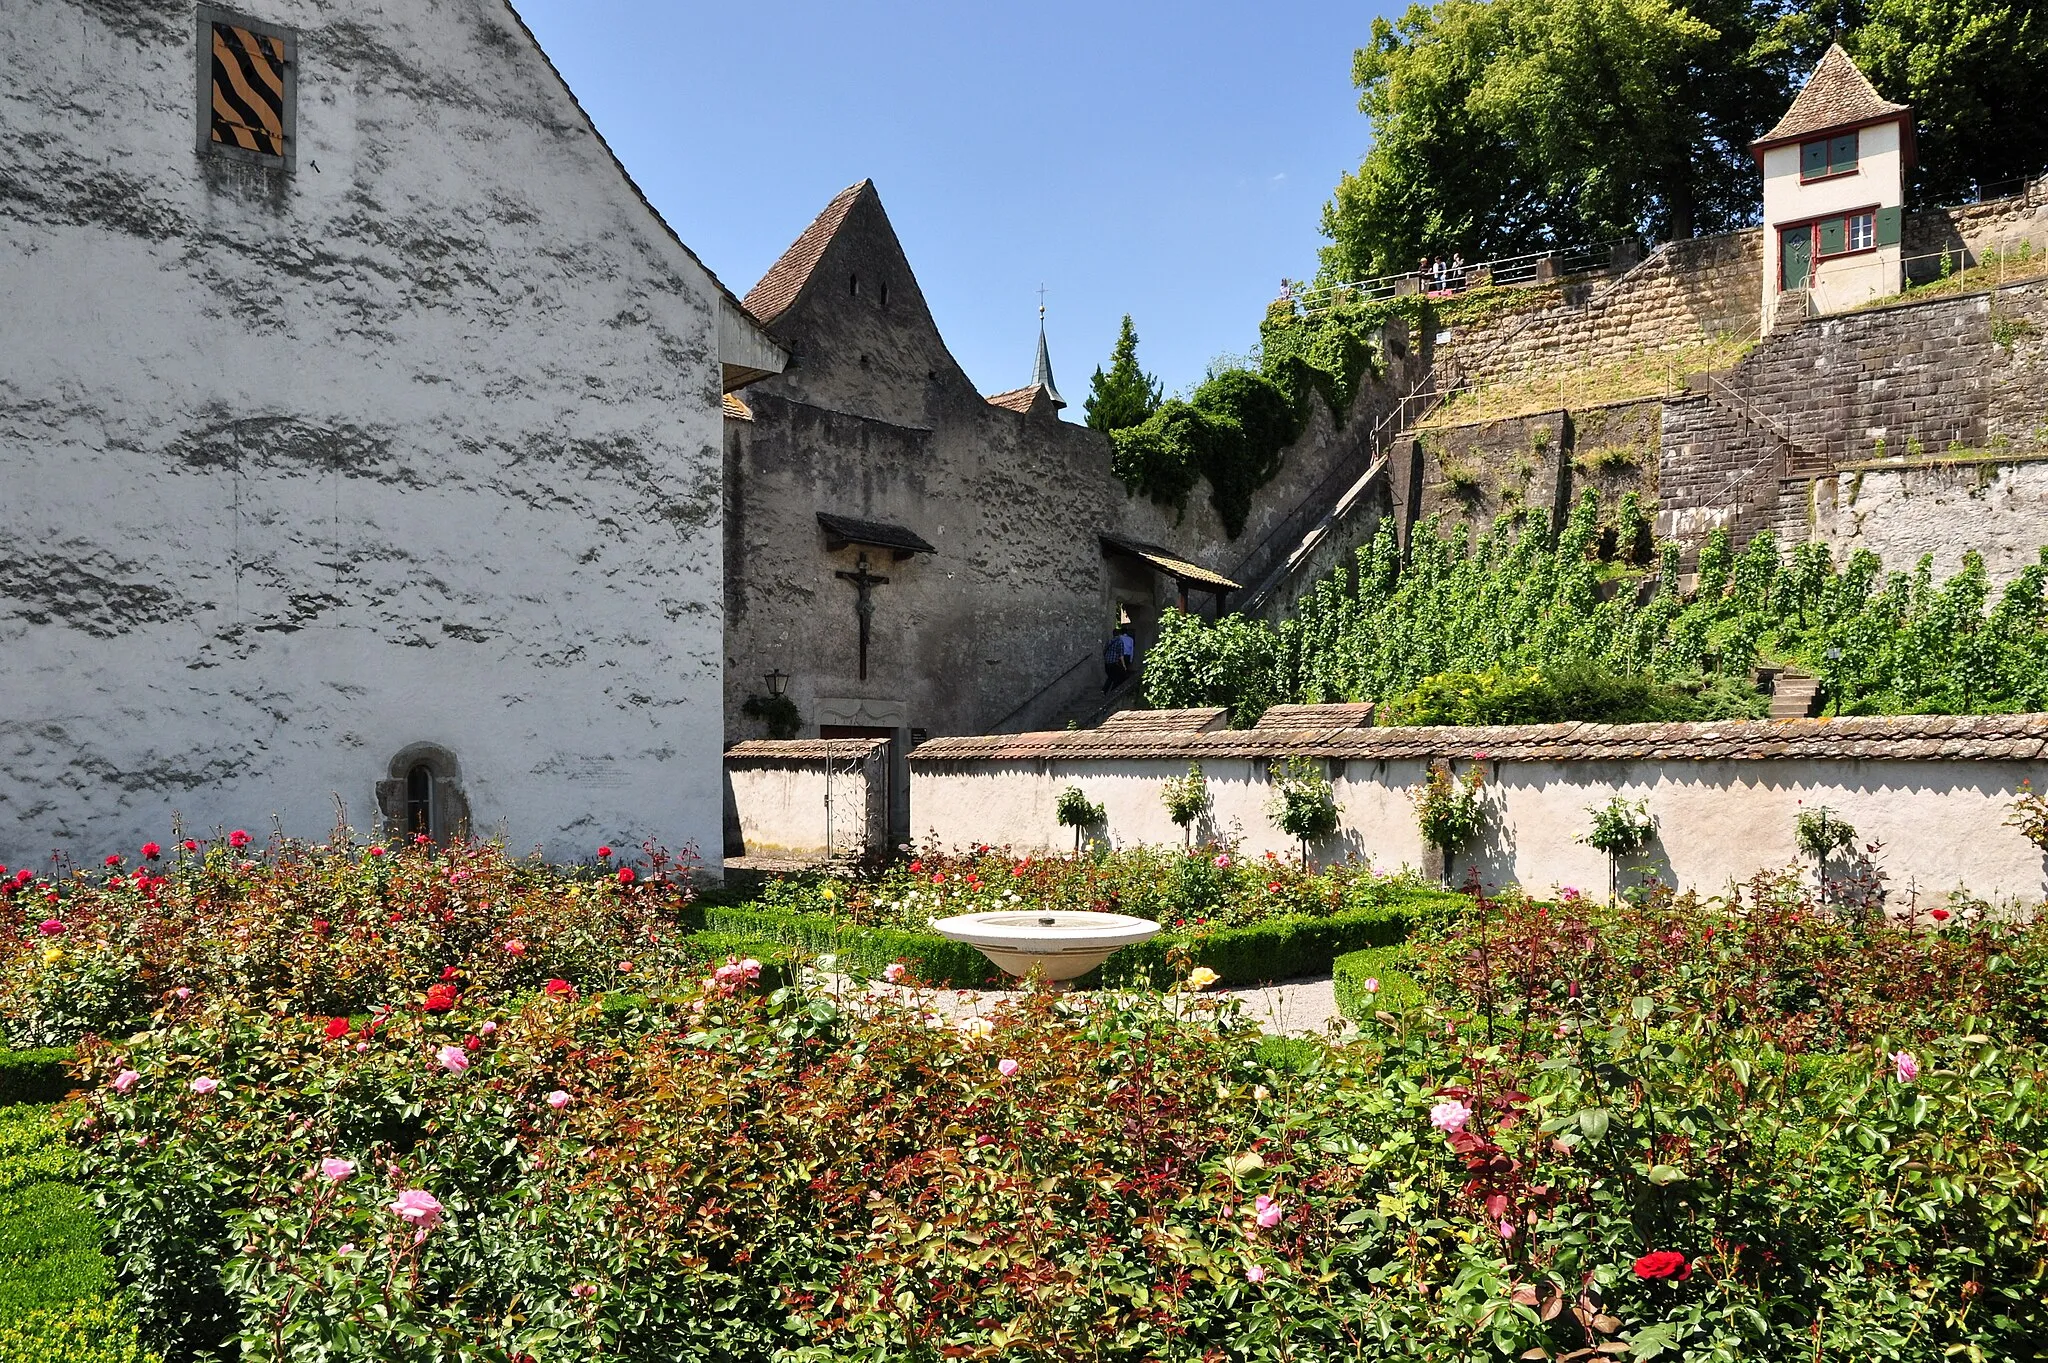 Photo showing: Rosengarten in Rapperswil (Switzerland) at the so-called Einsiedlerhaus building, Schlossberg vineyard and Lindenhof hill in the background, Endinger tower respectively Kapuzinerkloster to the left.